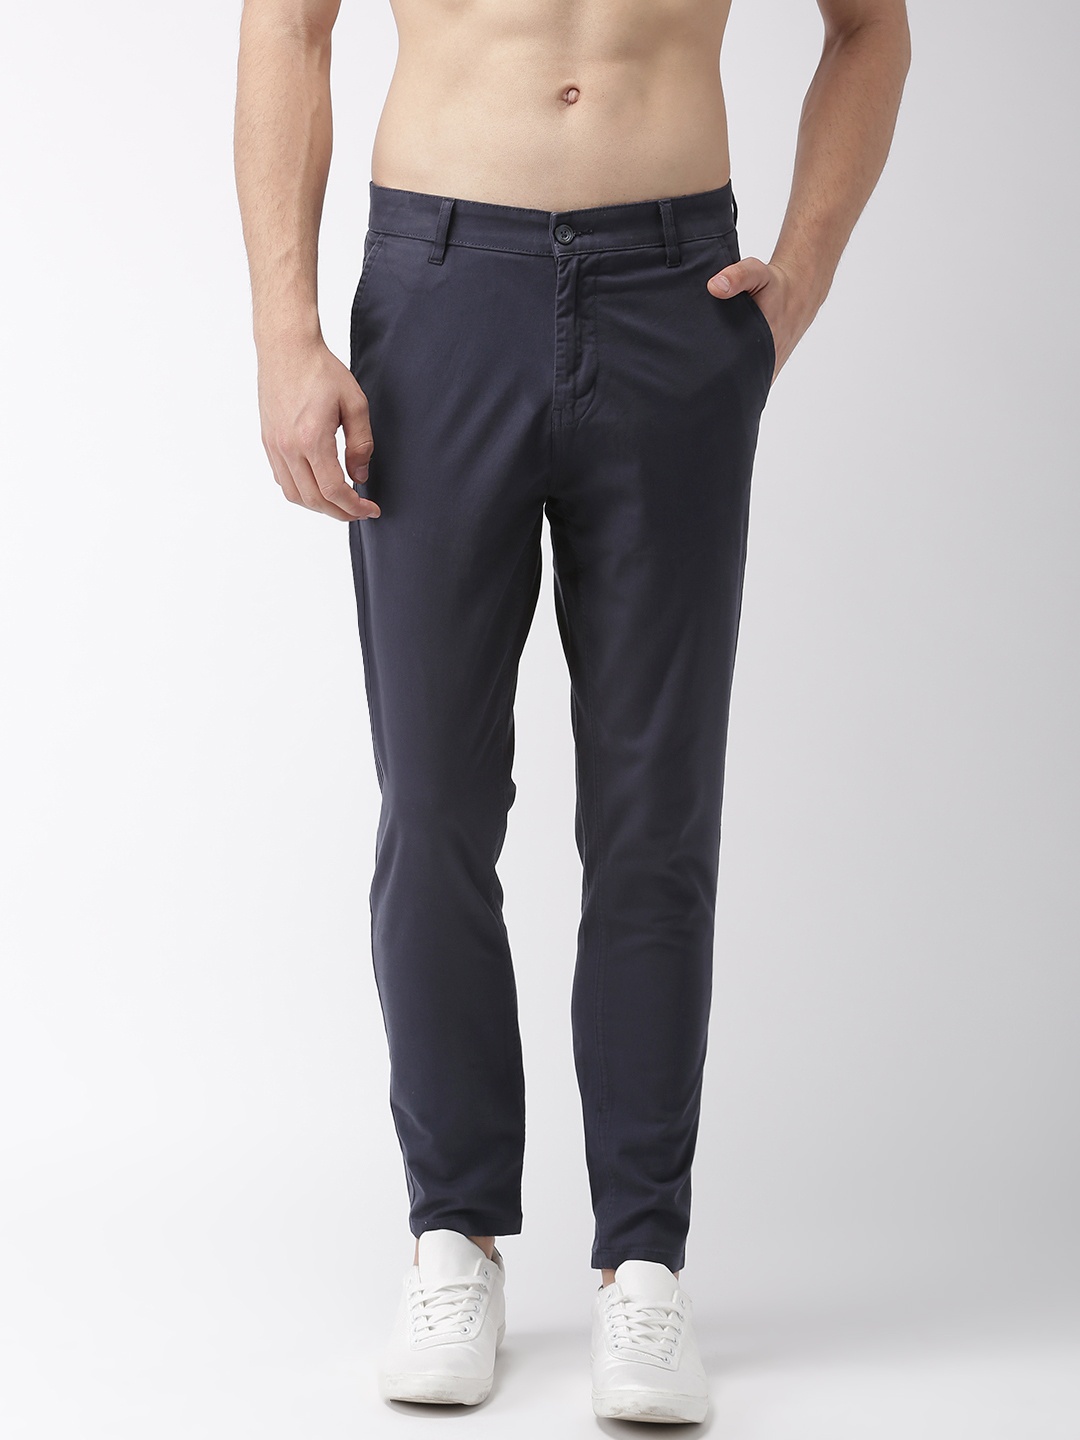 HIGHLANDER Men Navy Blue Tapered Fit Chinos - buy at the price of $8.44 ...